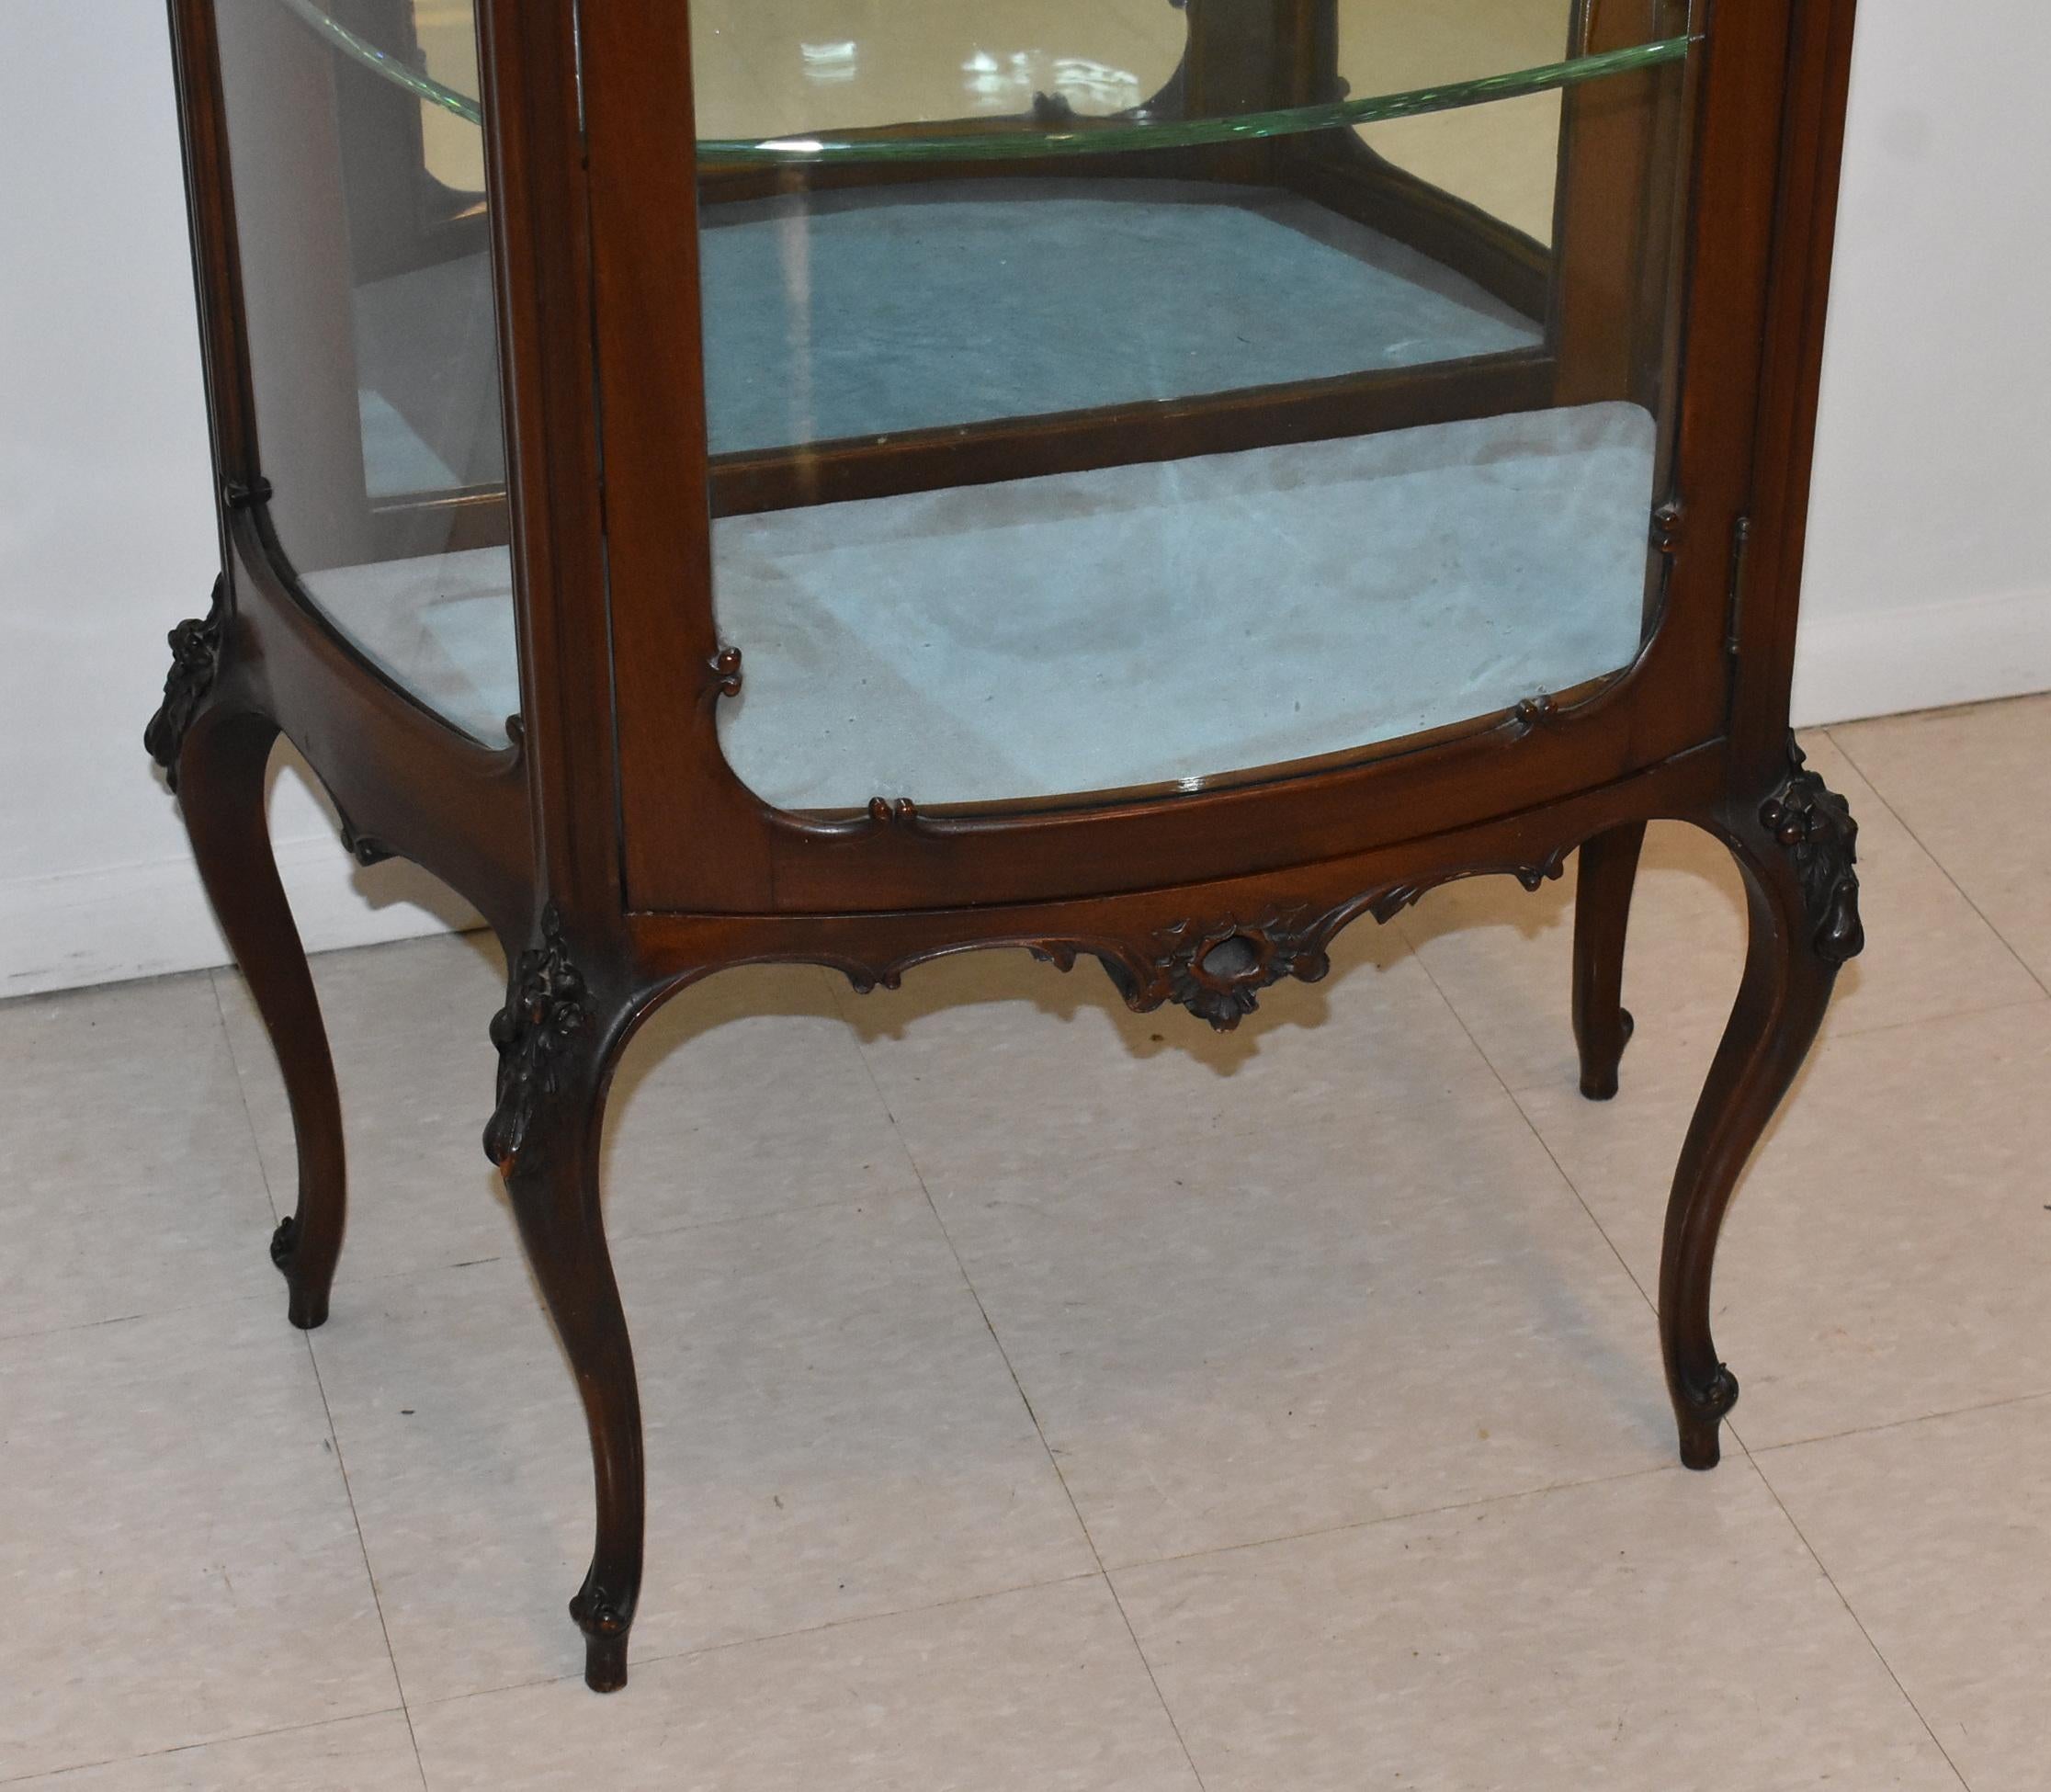 Antique French style mahogany curio cabinet, circa 1900. Curved glass panels with two 3/8